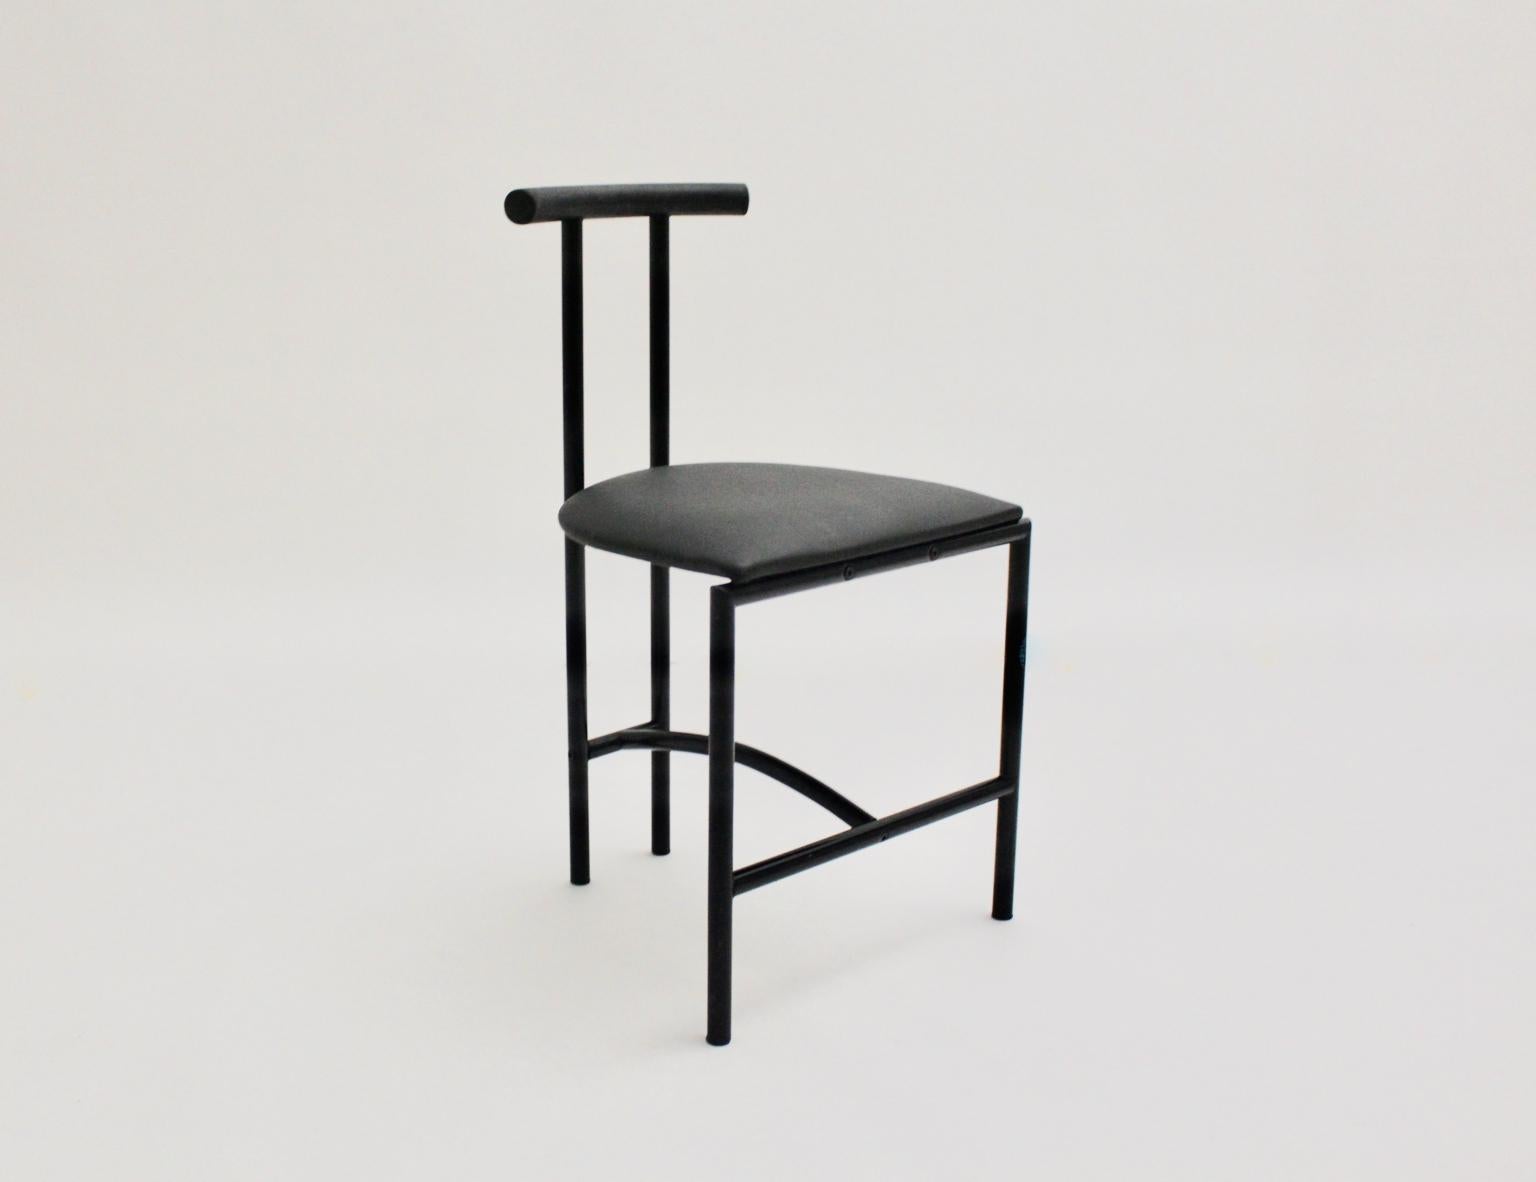 Late 20th Century Modern Black Vintage Metal Faux Leather Tokyo Chair by Rodney Kinsman, 1985, UK For Sale